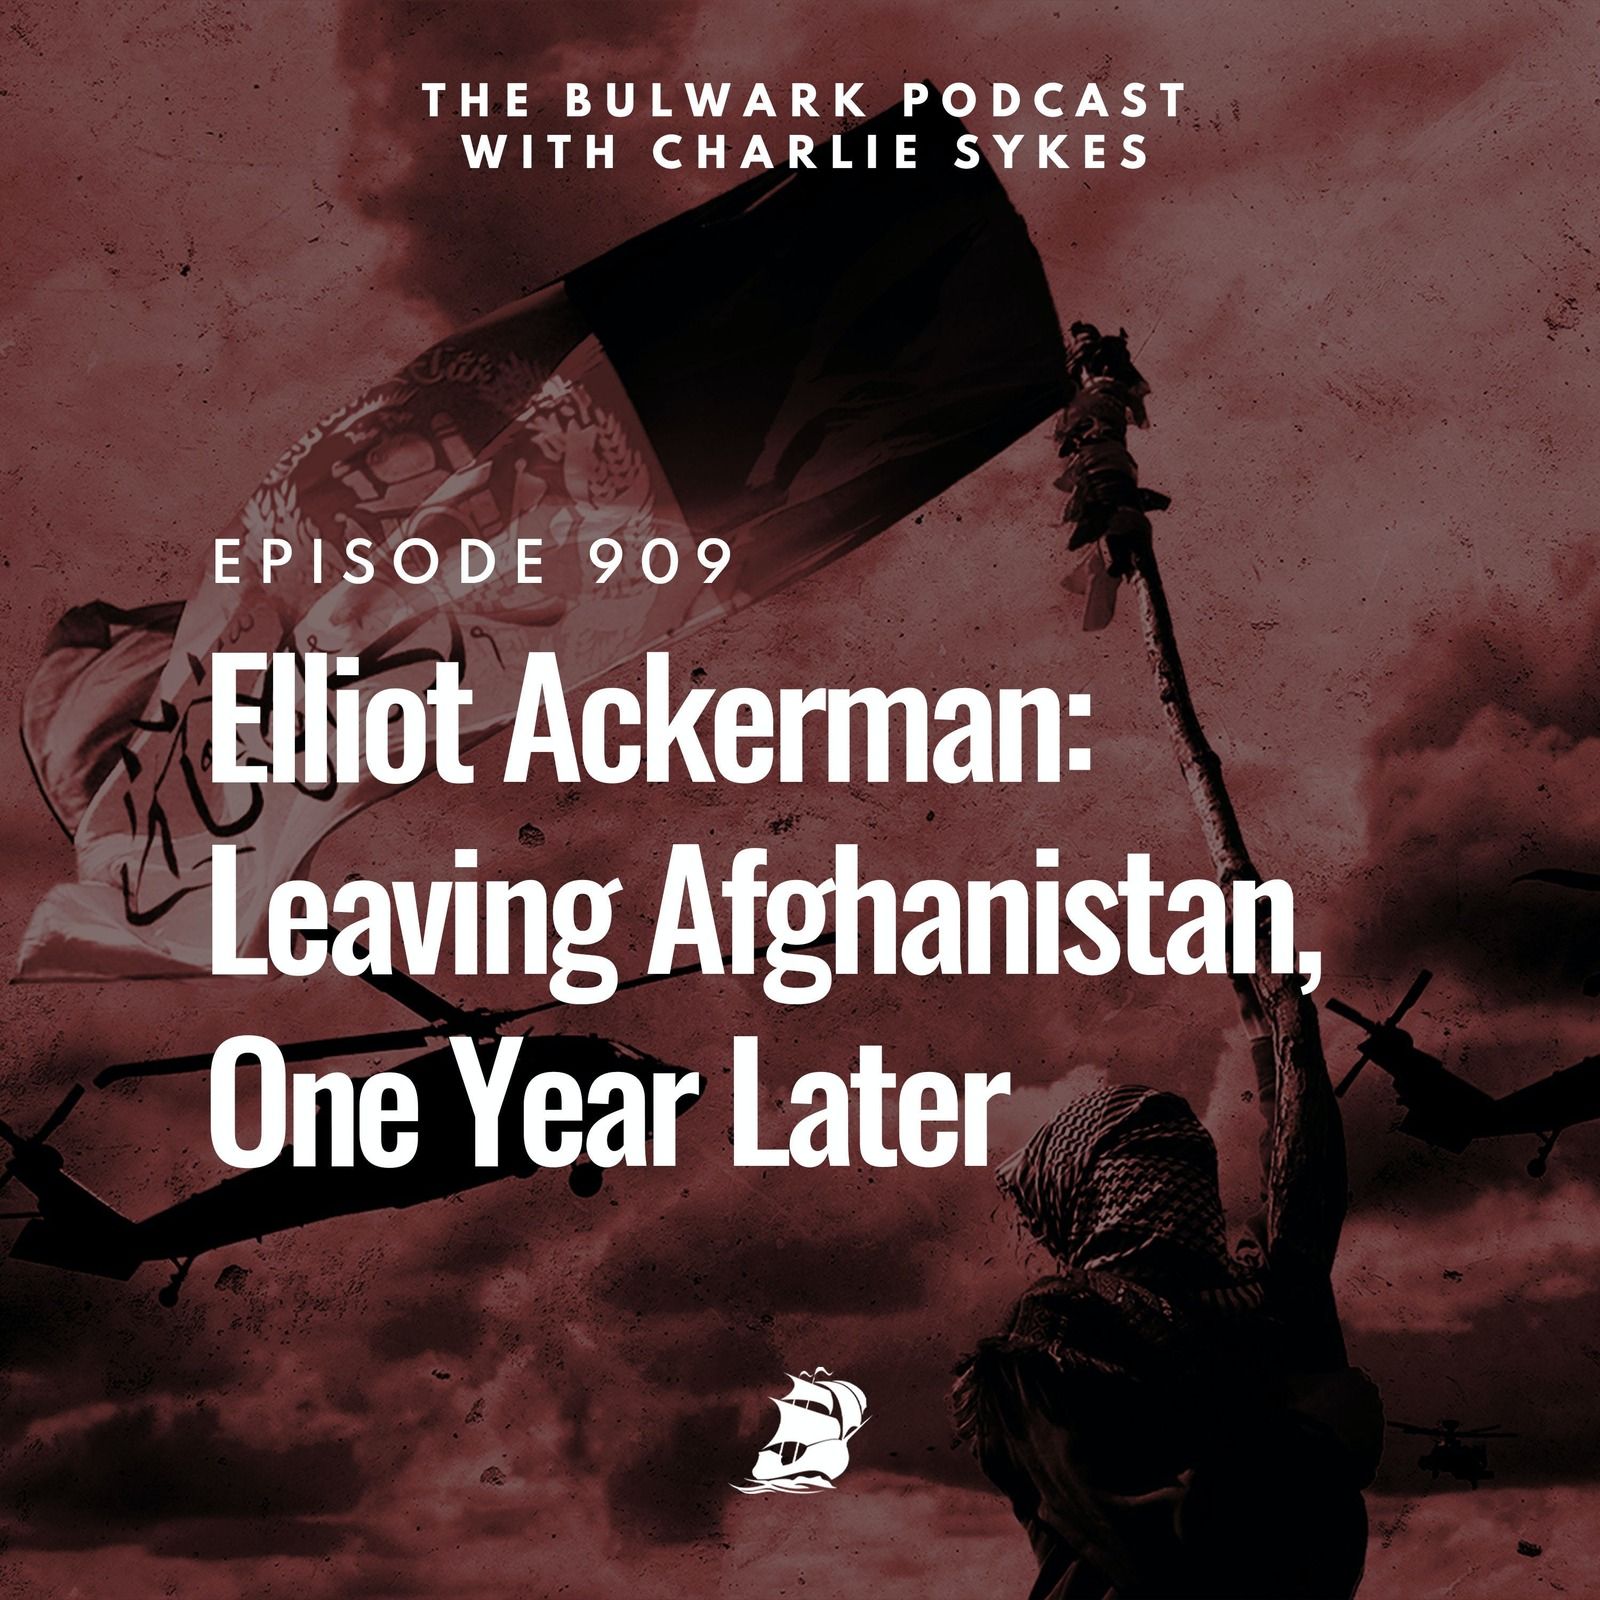 Elliot Ackerman: Leaving Afghanistan, One Year Later by The Bulwark Podcast